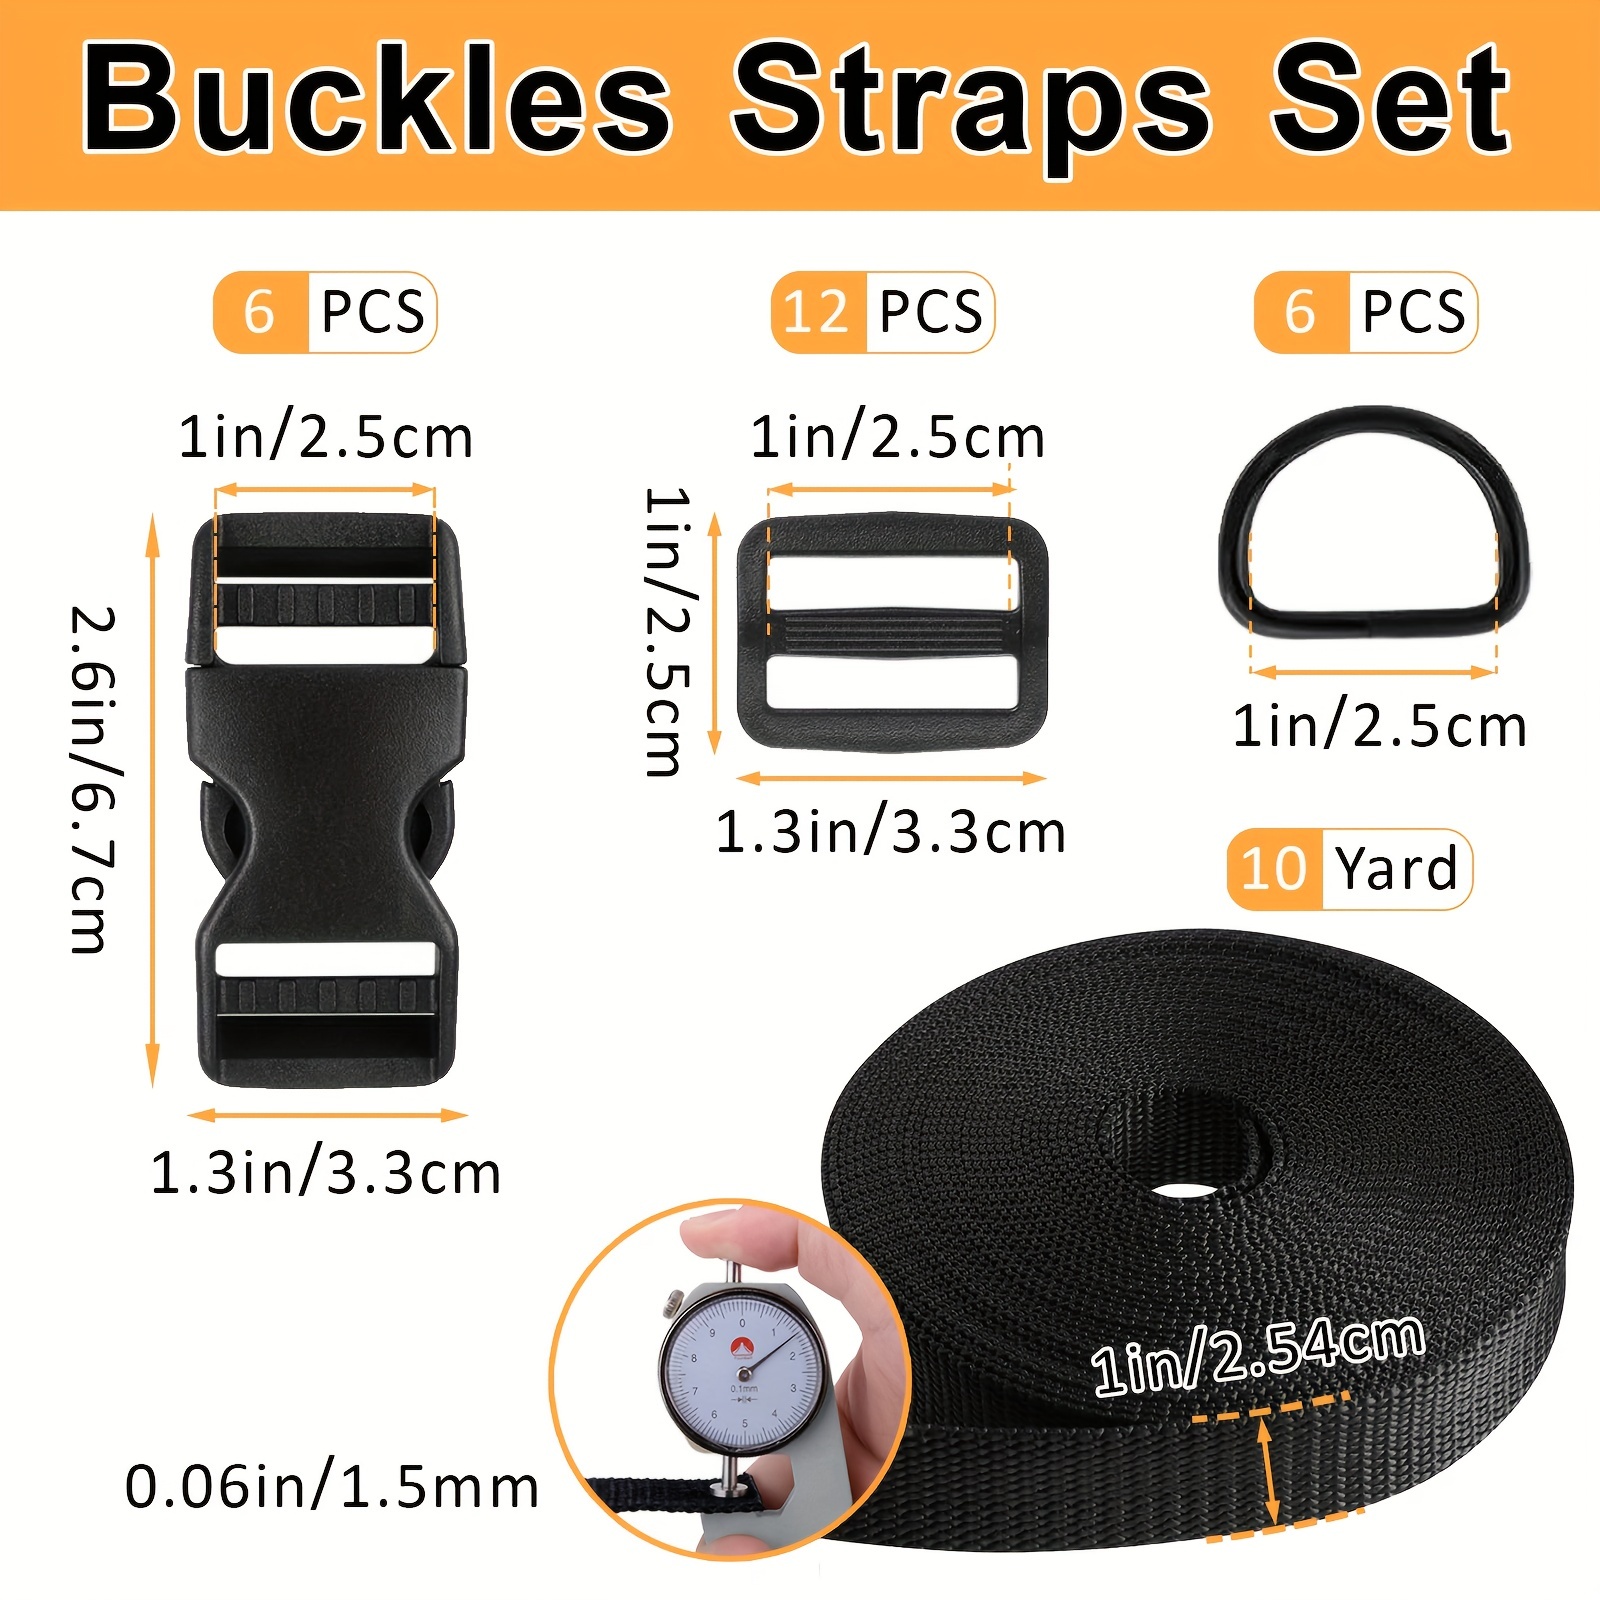 Durable Sturdy High Strength Nylon Webbing Strap with Buckle 49inch , Quick  Release Buckle